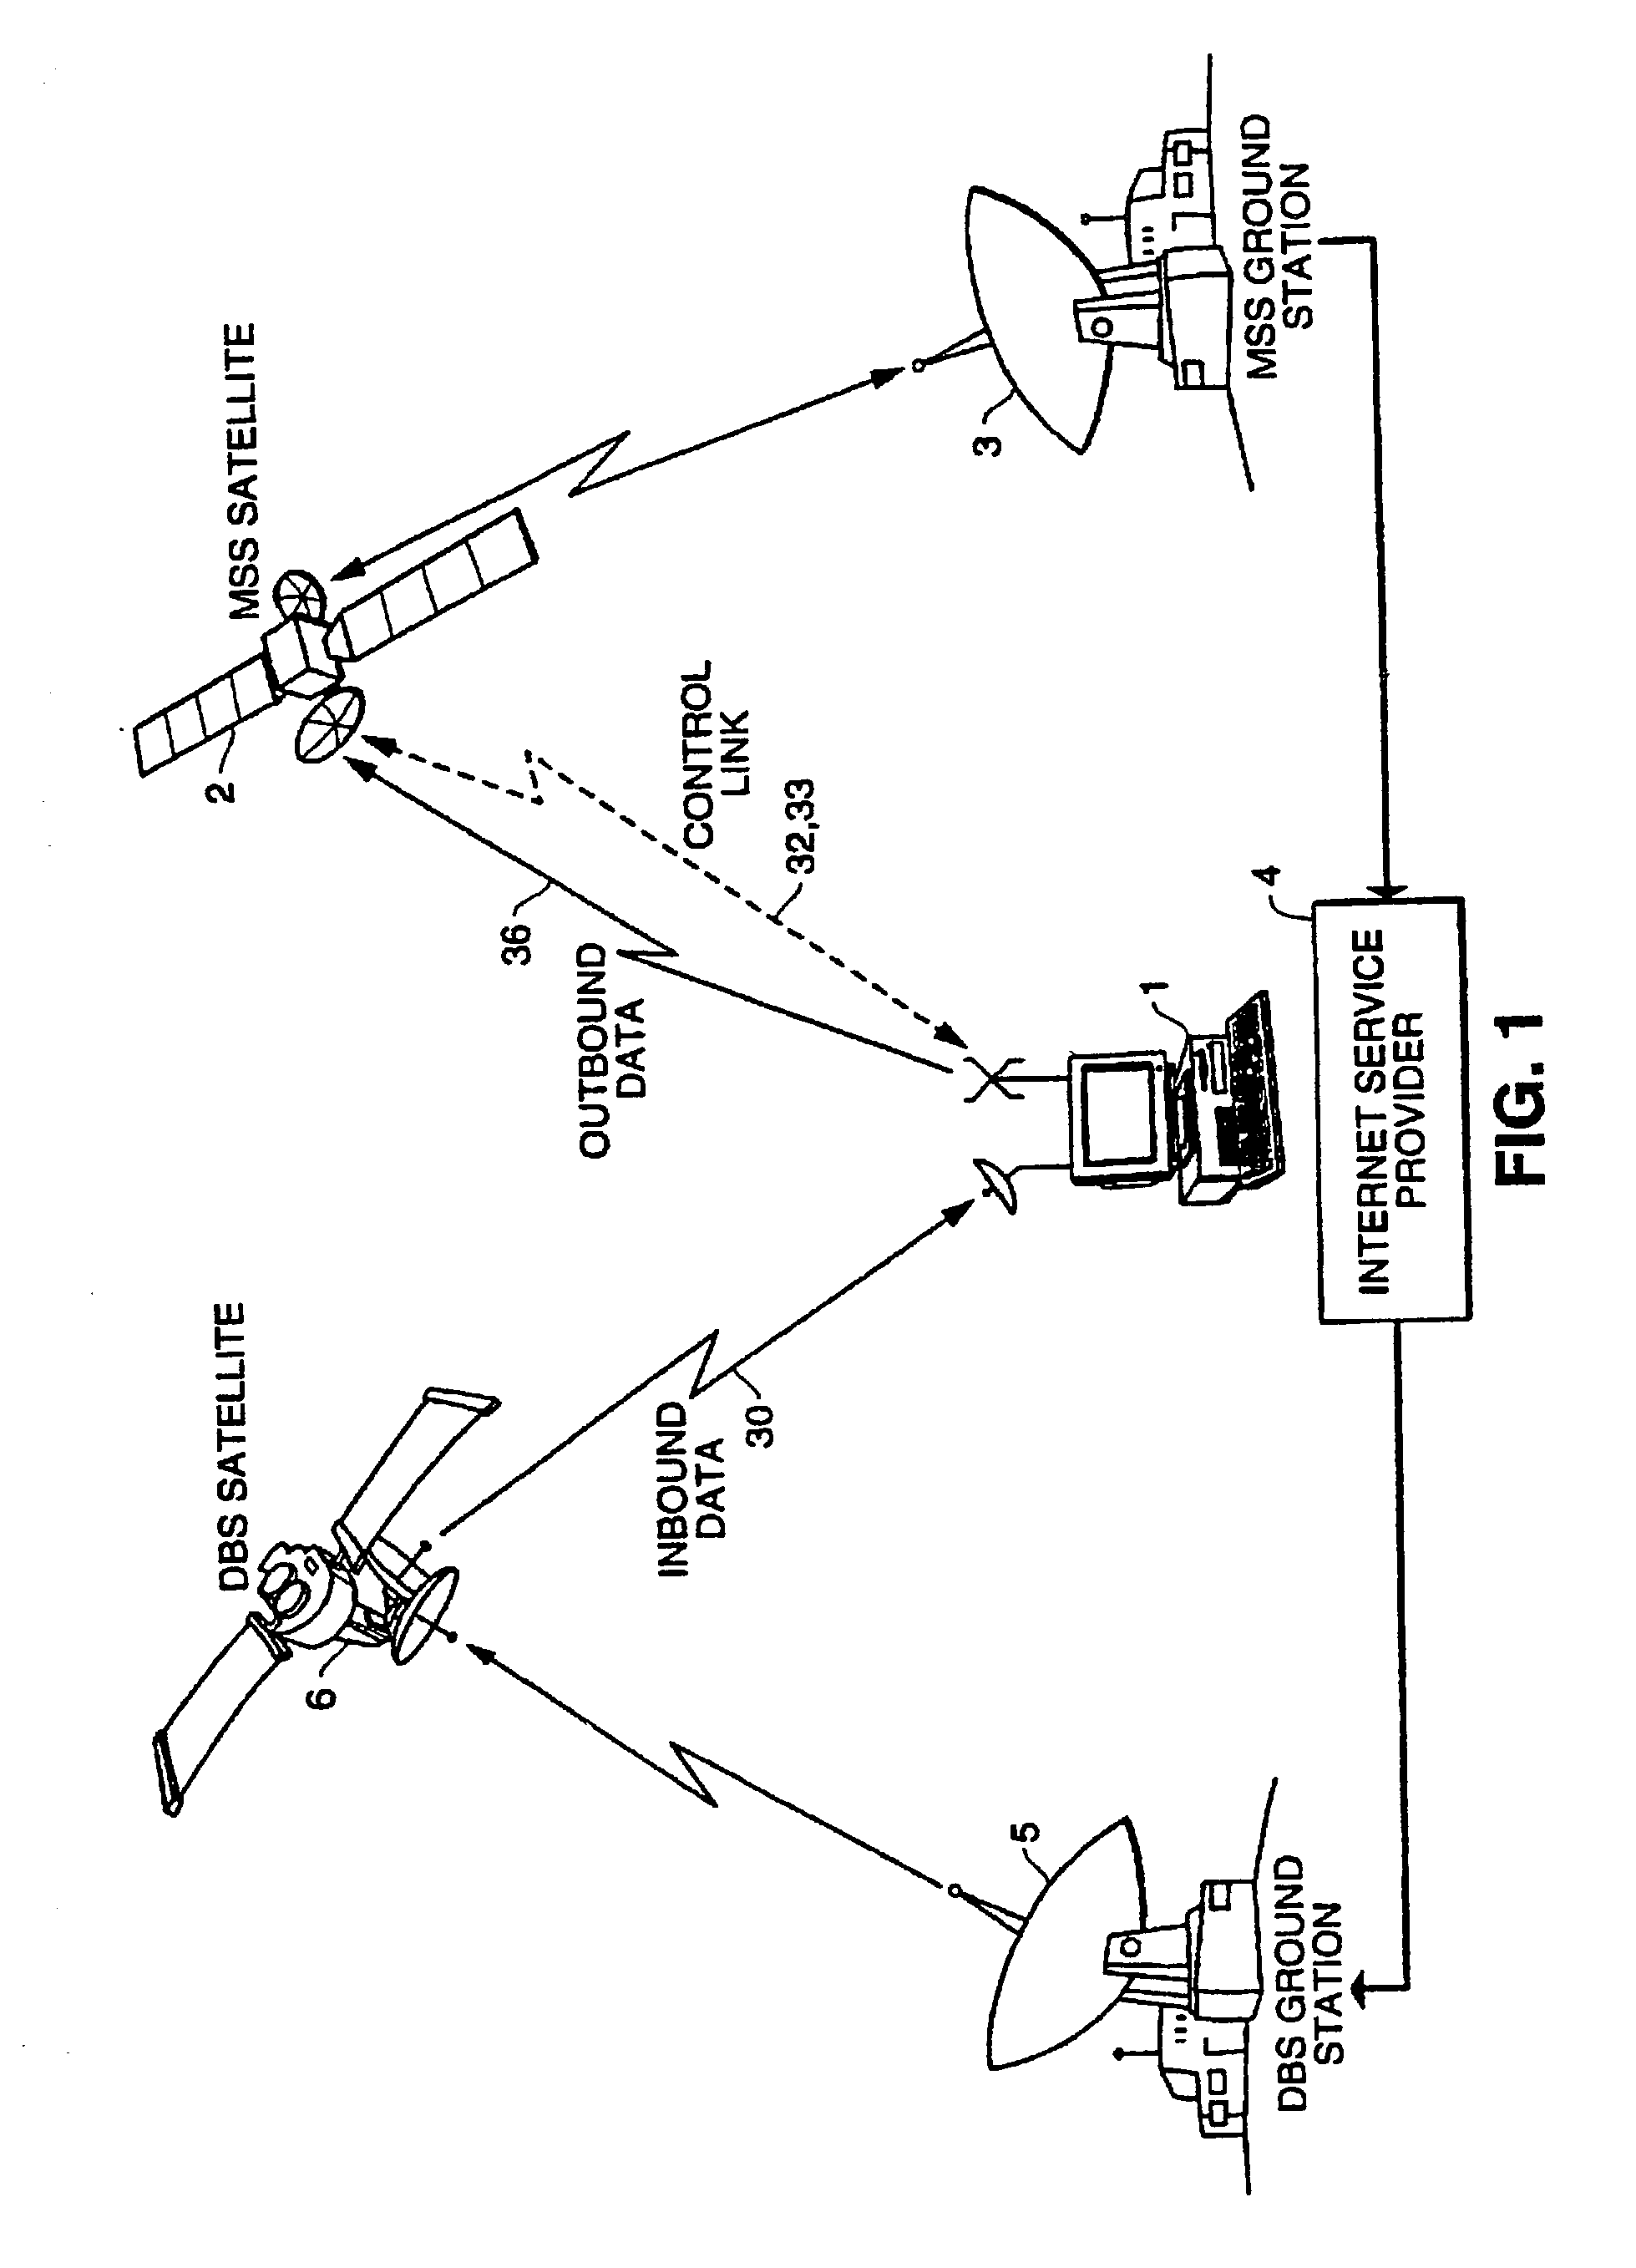 Data communications systems and methods using different wireless links for inbound and outbound data